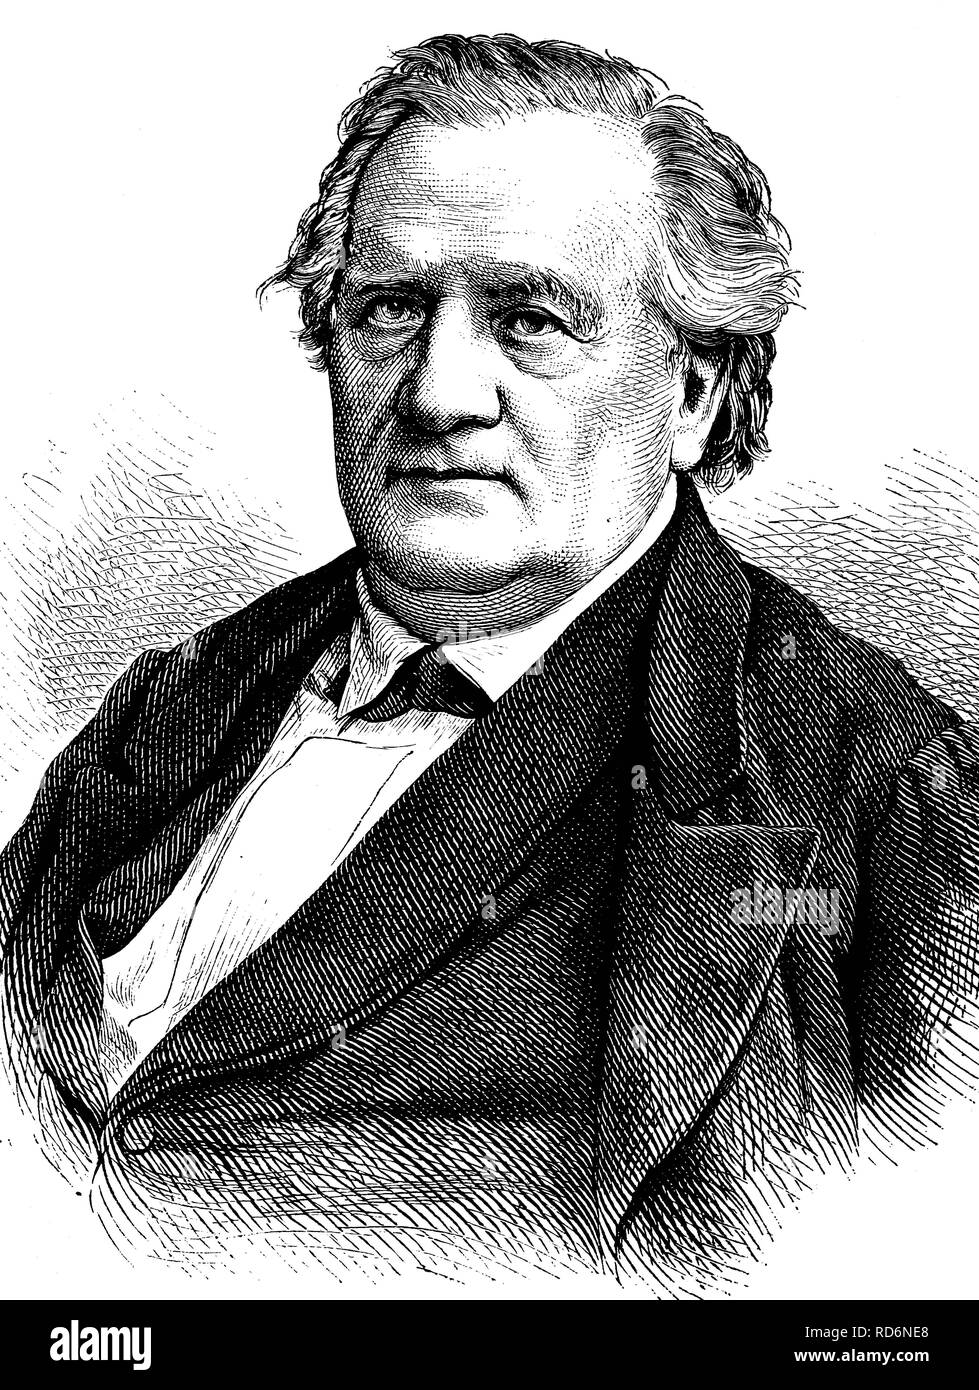 Franz Lachner, 1803-1890, German composer and conductor, historical illustration, circa 1886 Stock Photo